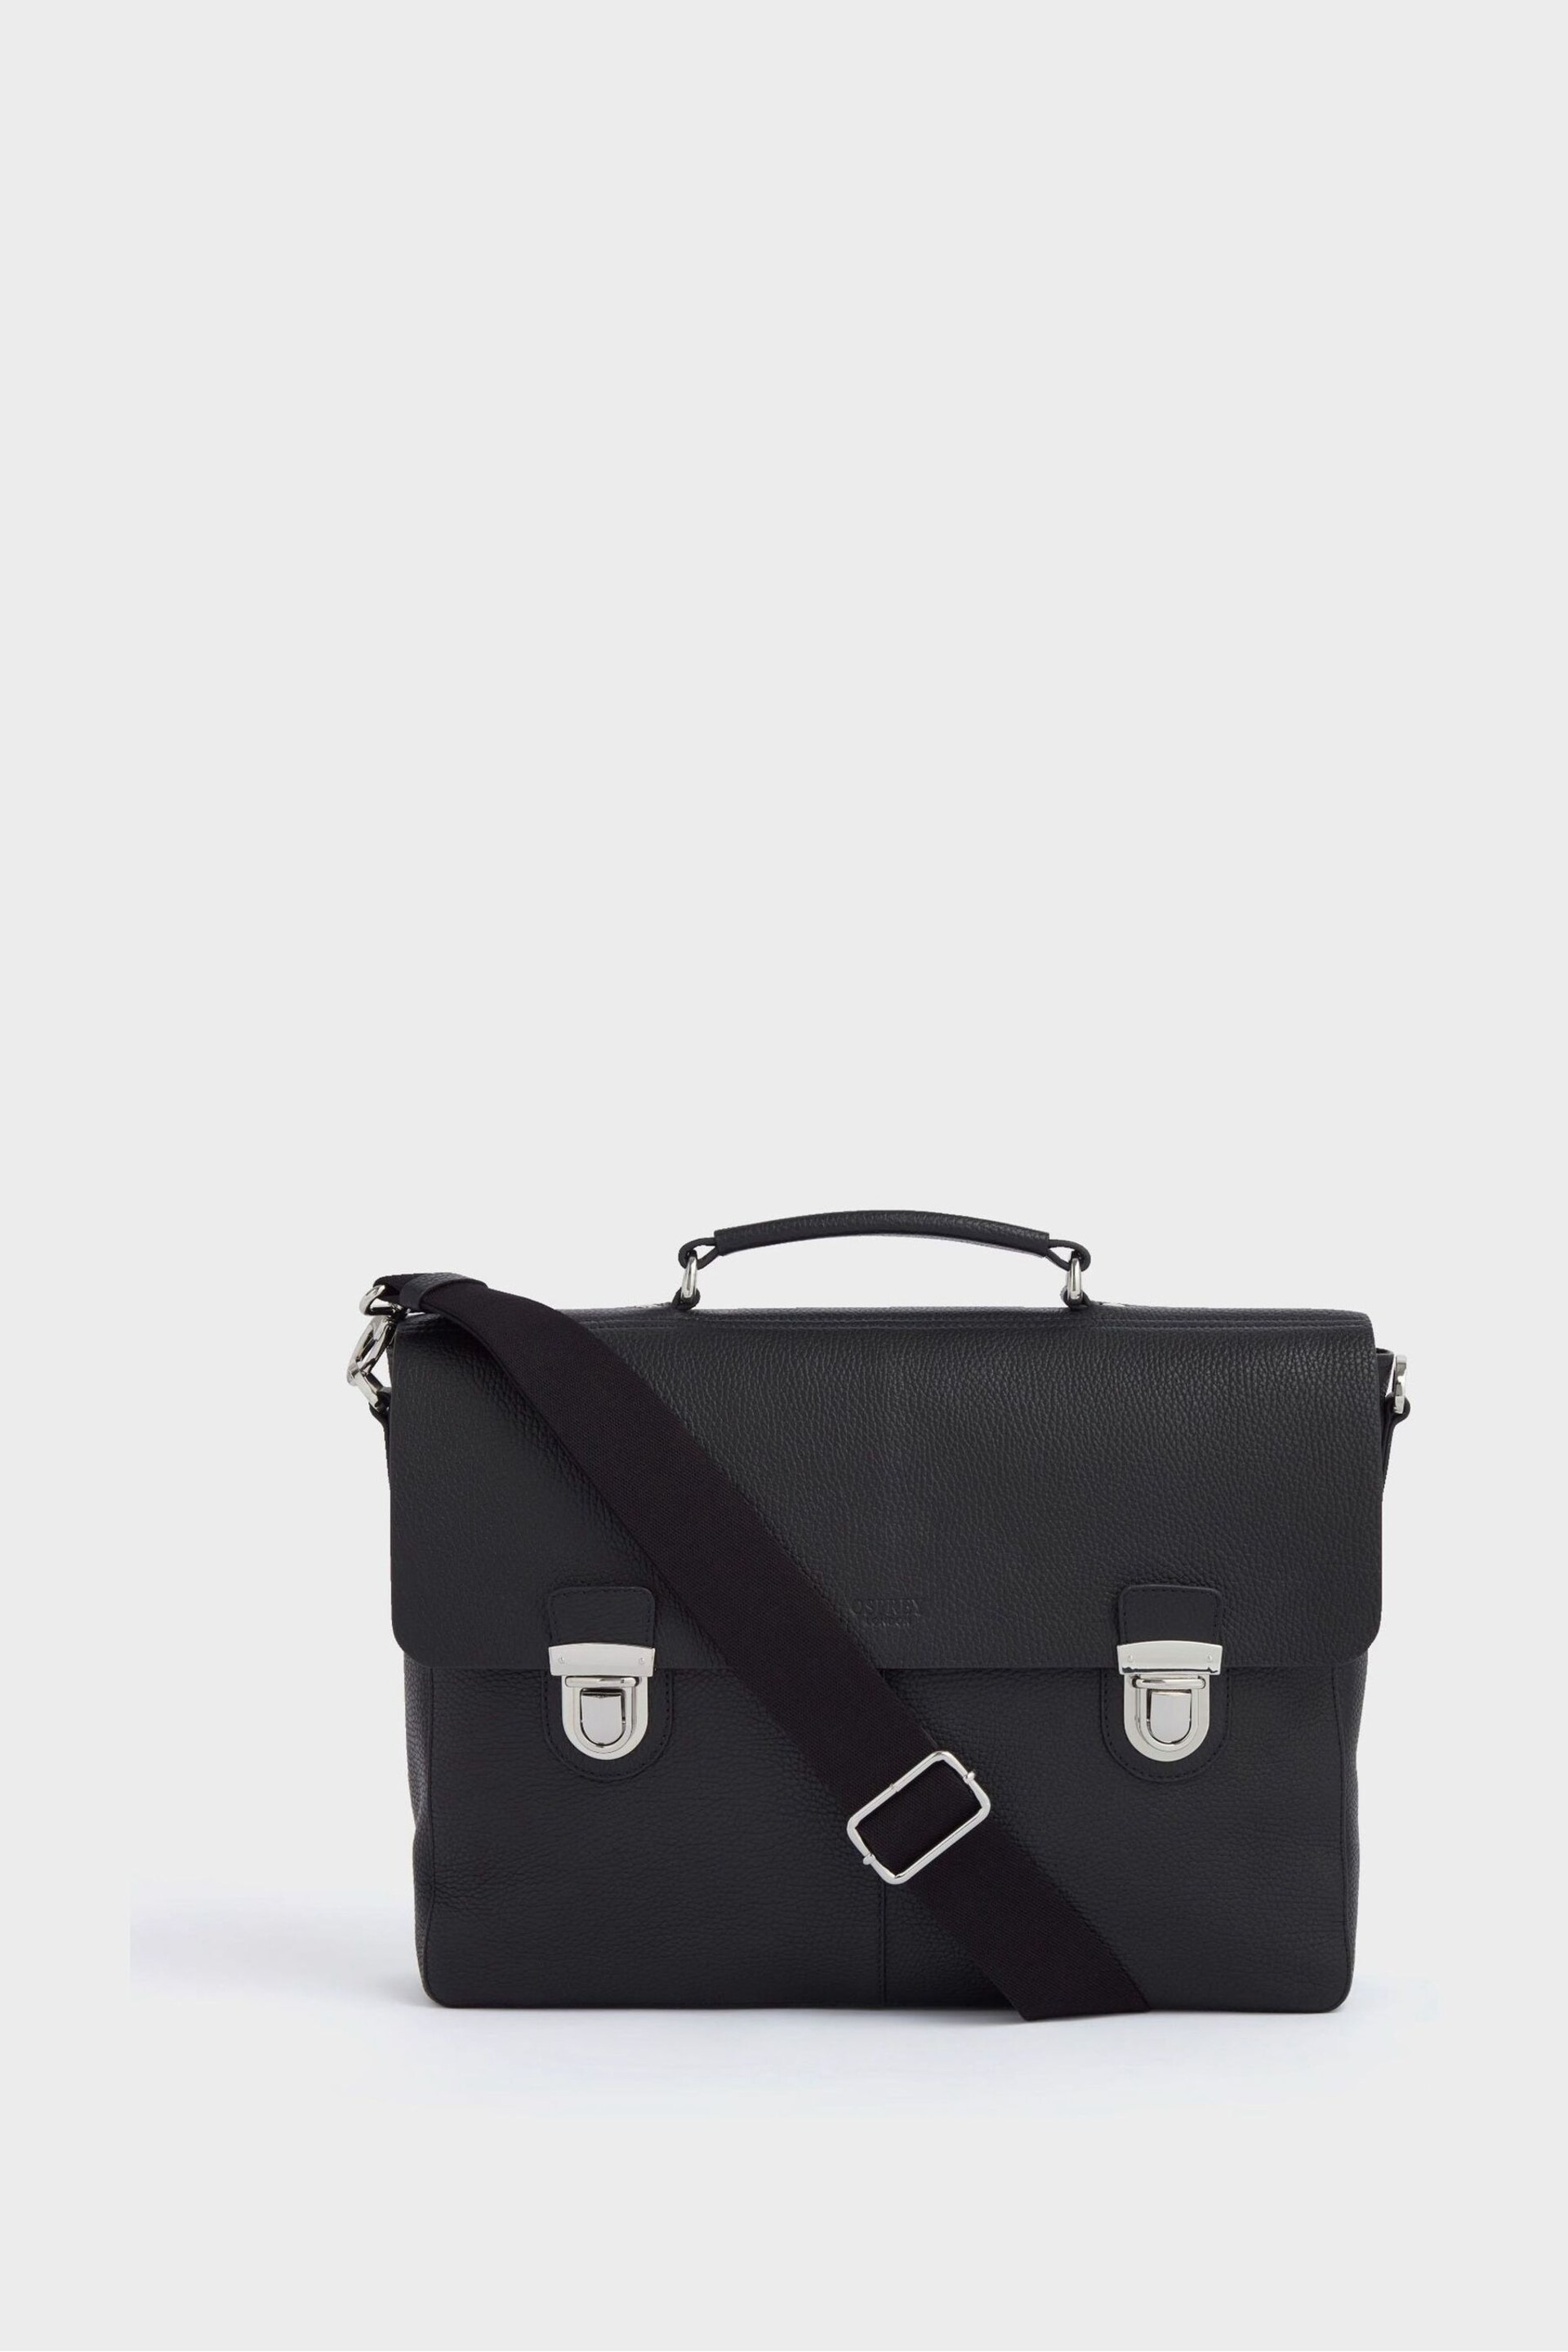 OSPREY LONDON The Forest Leather Black Briefcase - Image 2 of 7